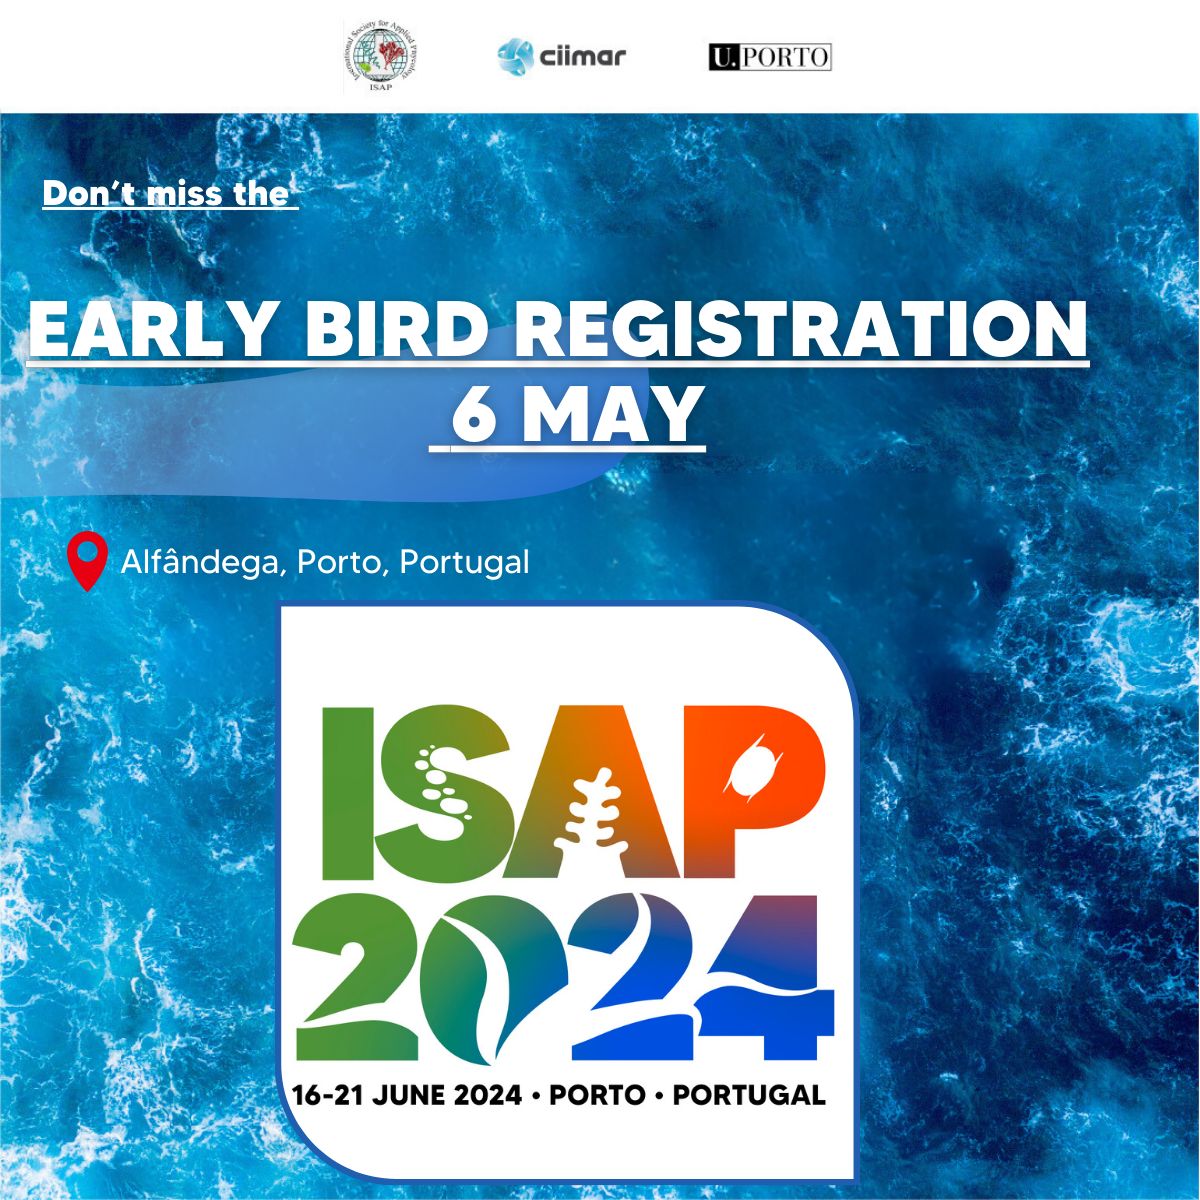 🐦Last days to take advantage of the Early Bird offer! Secure your spot before 𝗠𝗮𝘆 𝟲𝘁𝗵! Join us for #ISAP2024 and immerse yourself in the latest trends, innovations, and research shaping the future of #Phycology! 👉Register now: isap2024.com #CIIMARevents